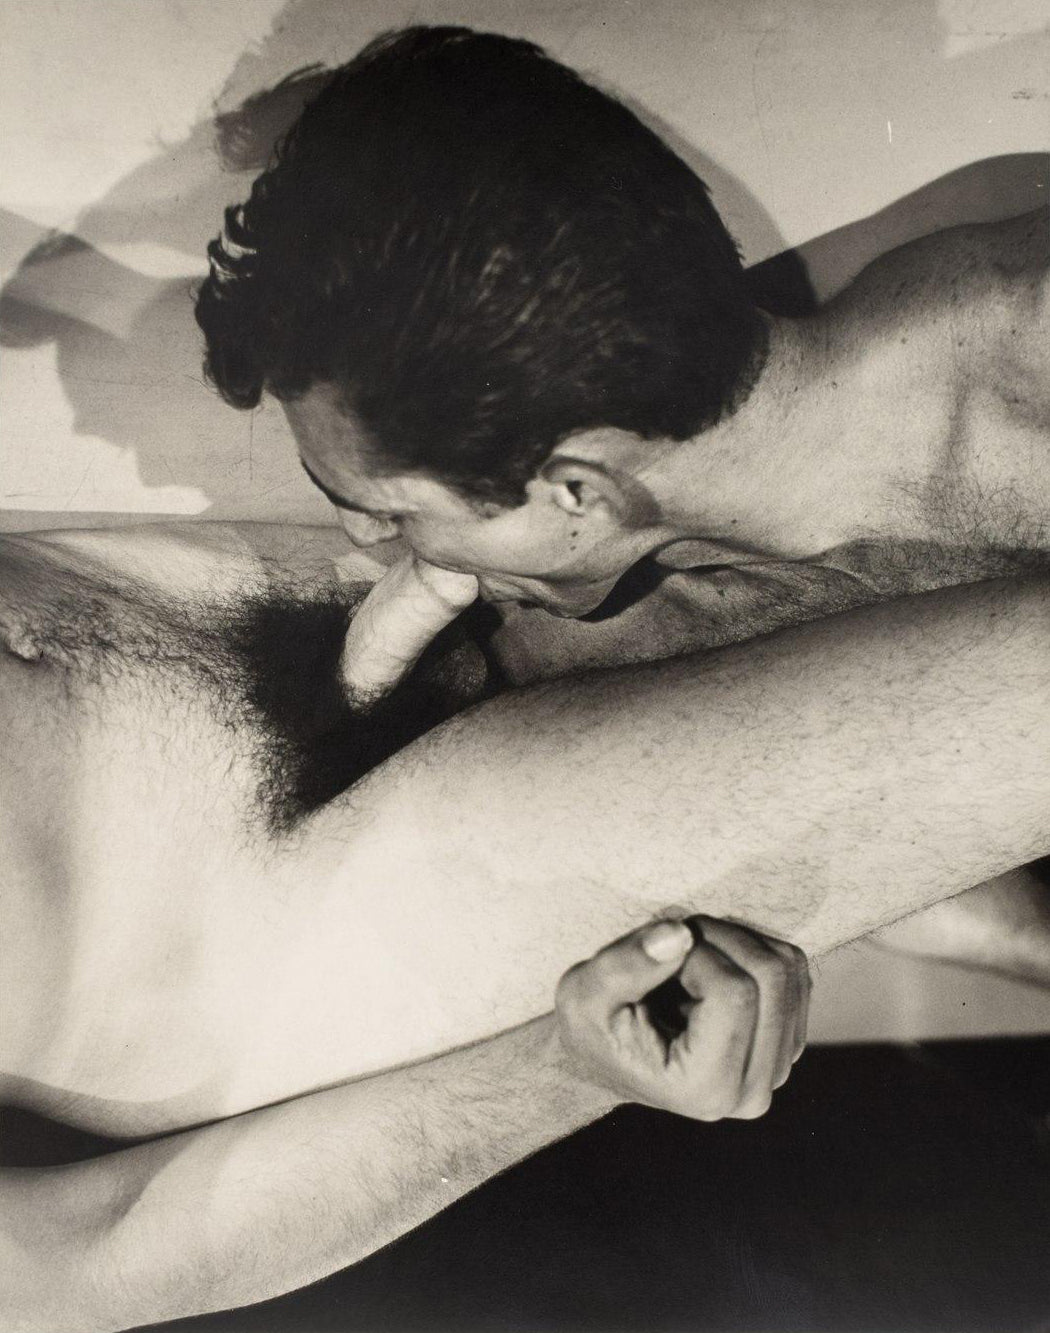 Vintage Porn From The 1800s Oral - Vintage Gay Blowjob 1800s | Gay Fetish XXX